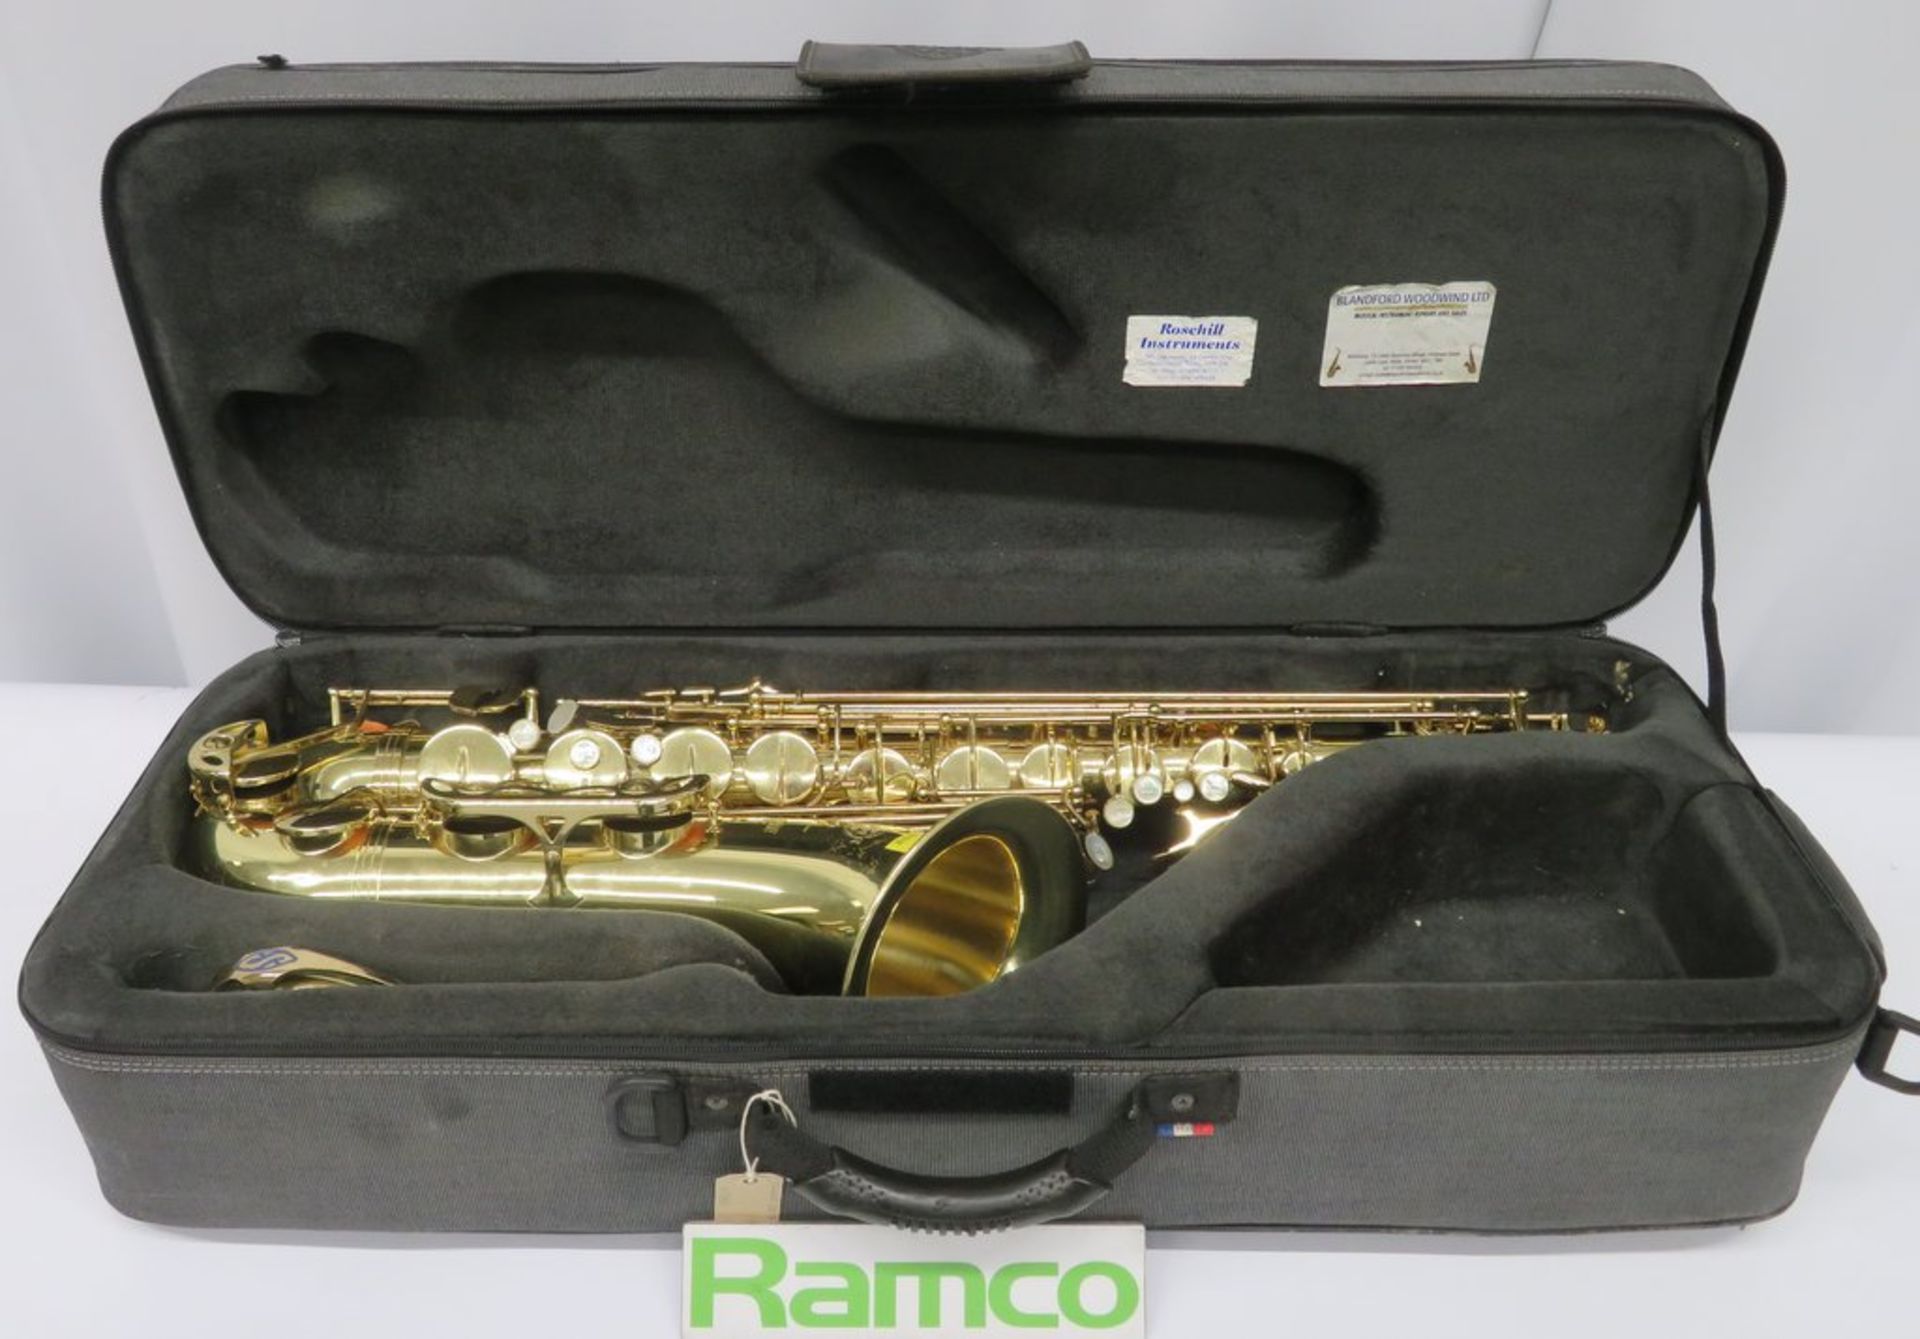 Henri Selmer Super Action 80 Serie 3 Tenor Saxophone With Case. Serial Number: N.643778.